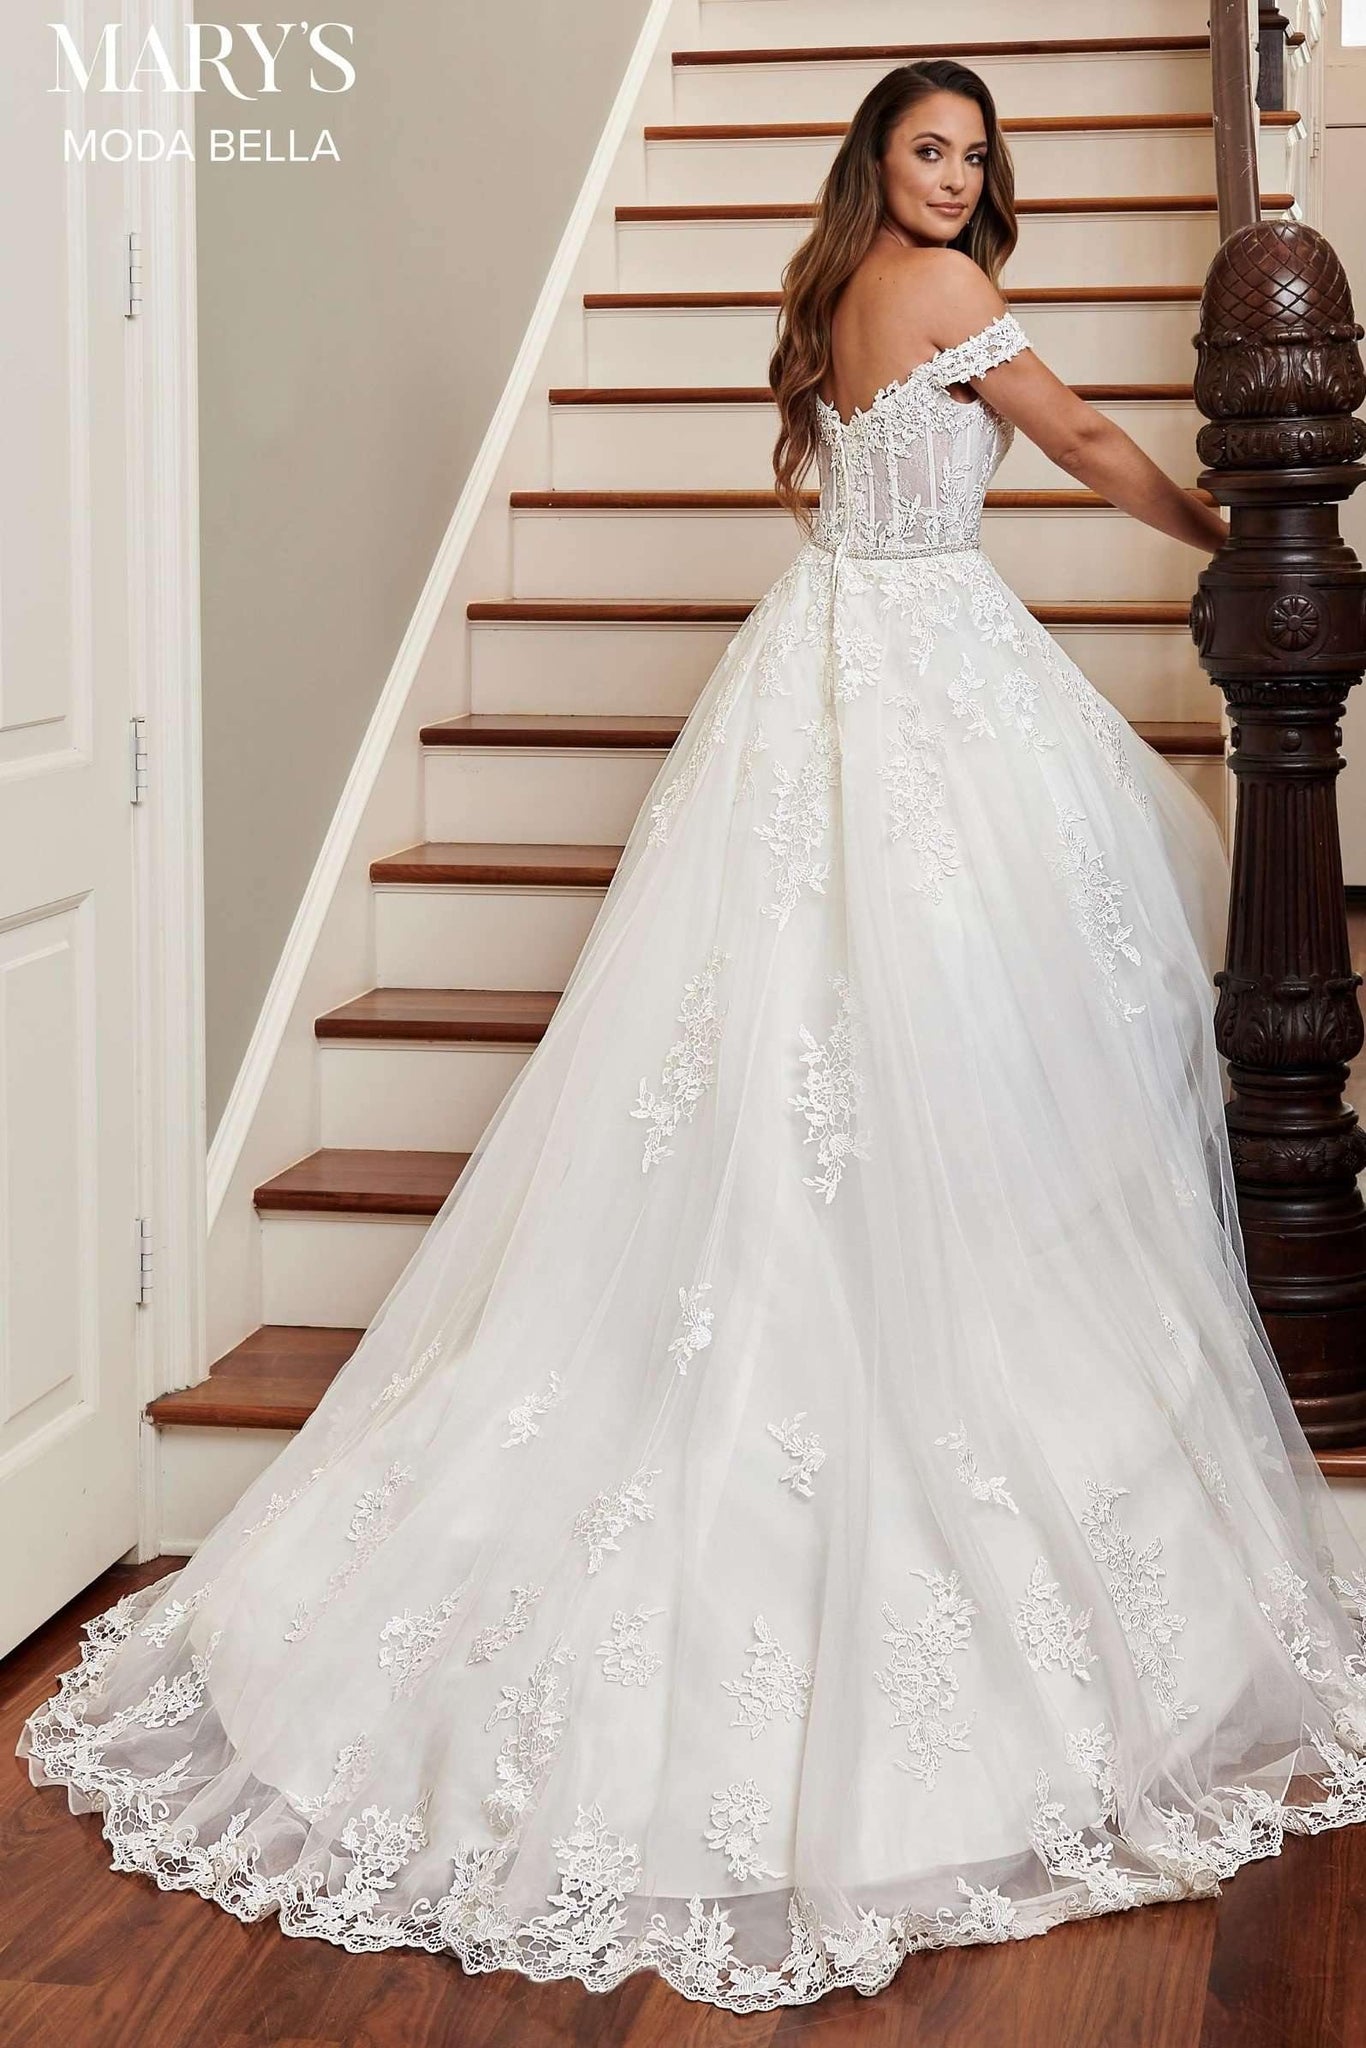 MARY'S BRIDAL - Carmen - Adore Bridal and Occasion Wear